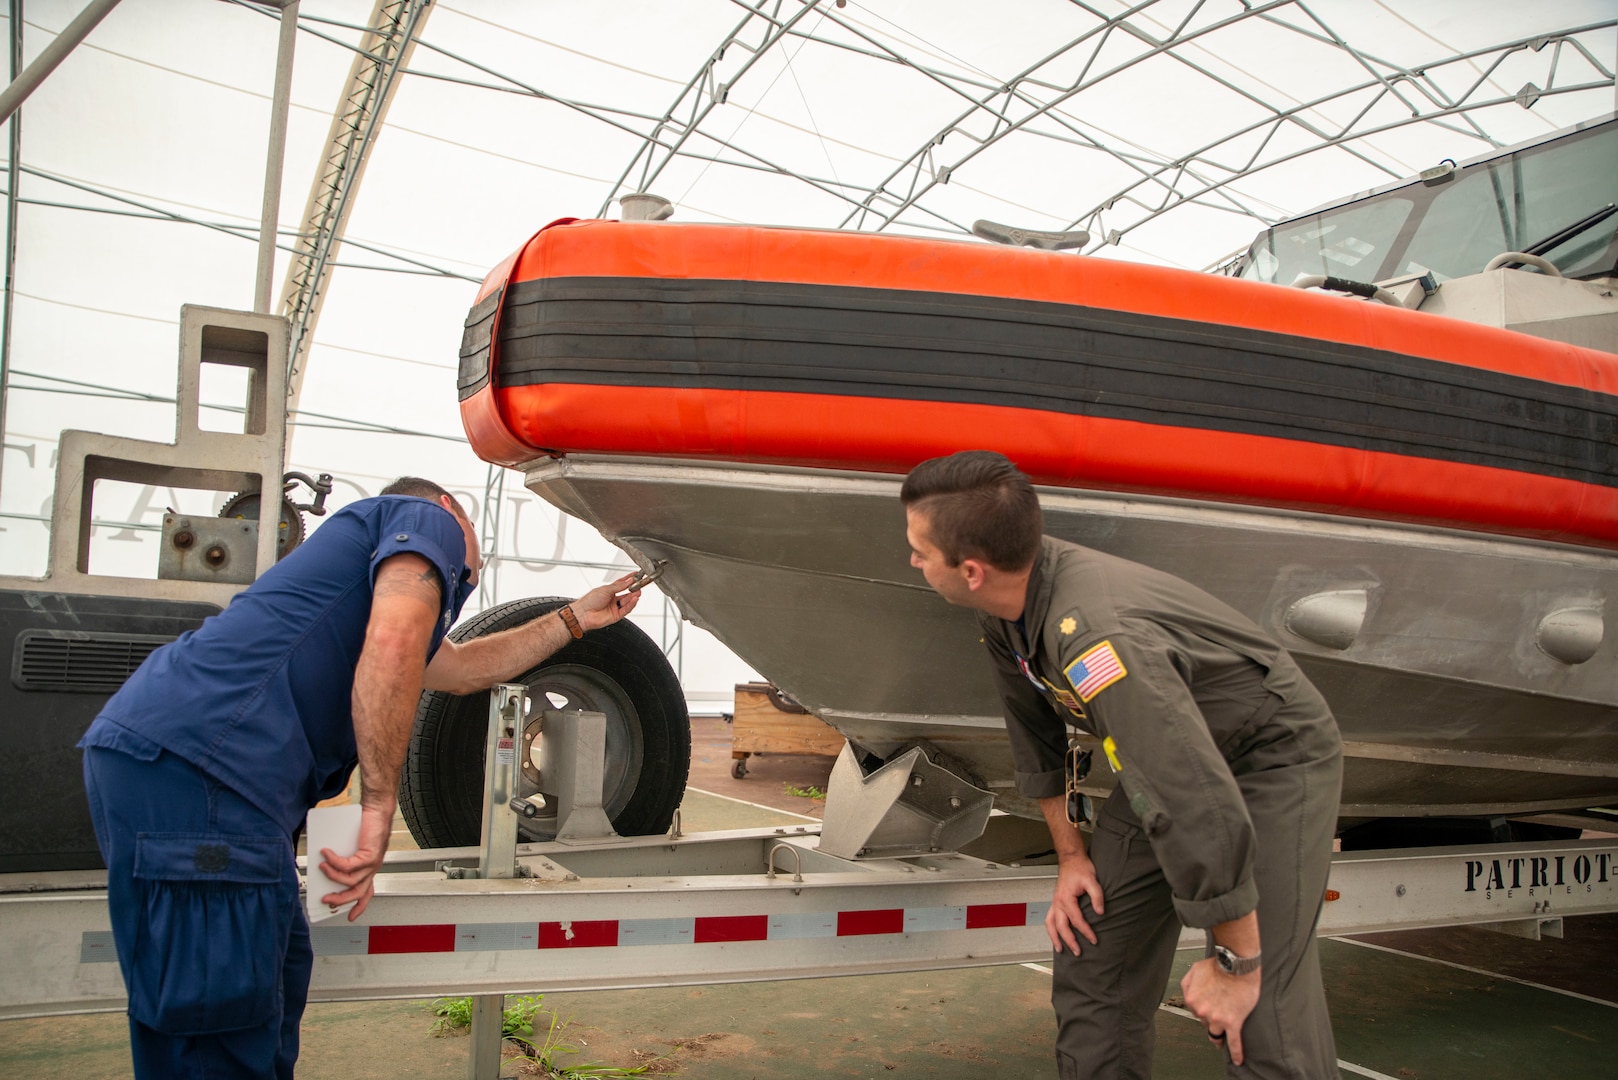 Petty Officer 1st Class Blaine Green (left) and Lt. Cmdr. Christopher Smith (right), inspect a small boat for damages. (U.S. Coast Guard photo)